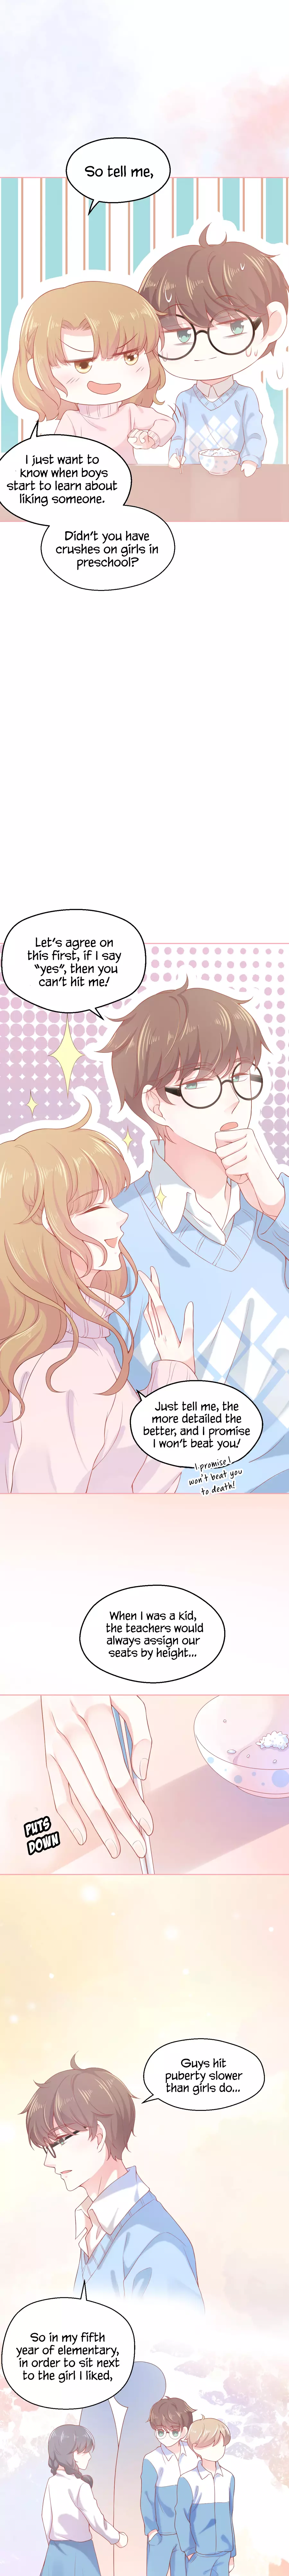 Being With You Means The World To Me - 4 page 6